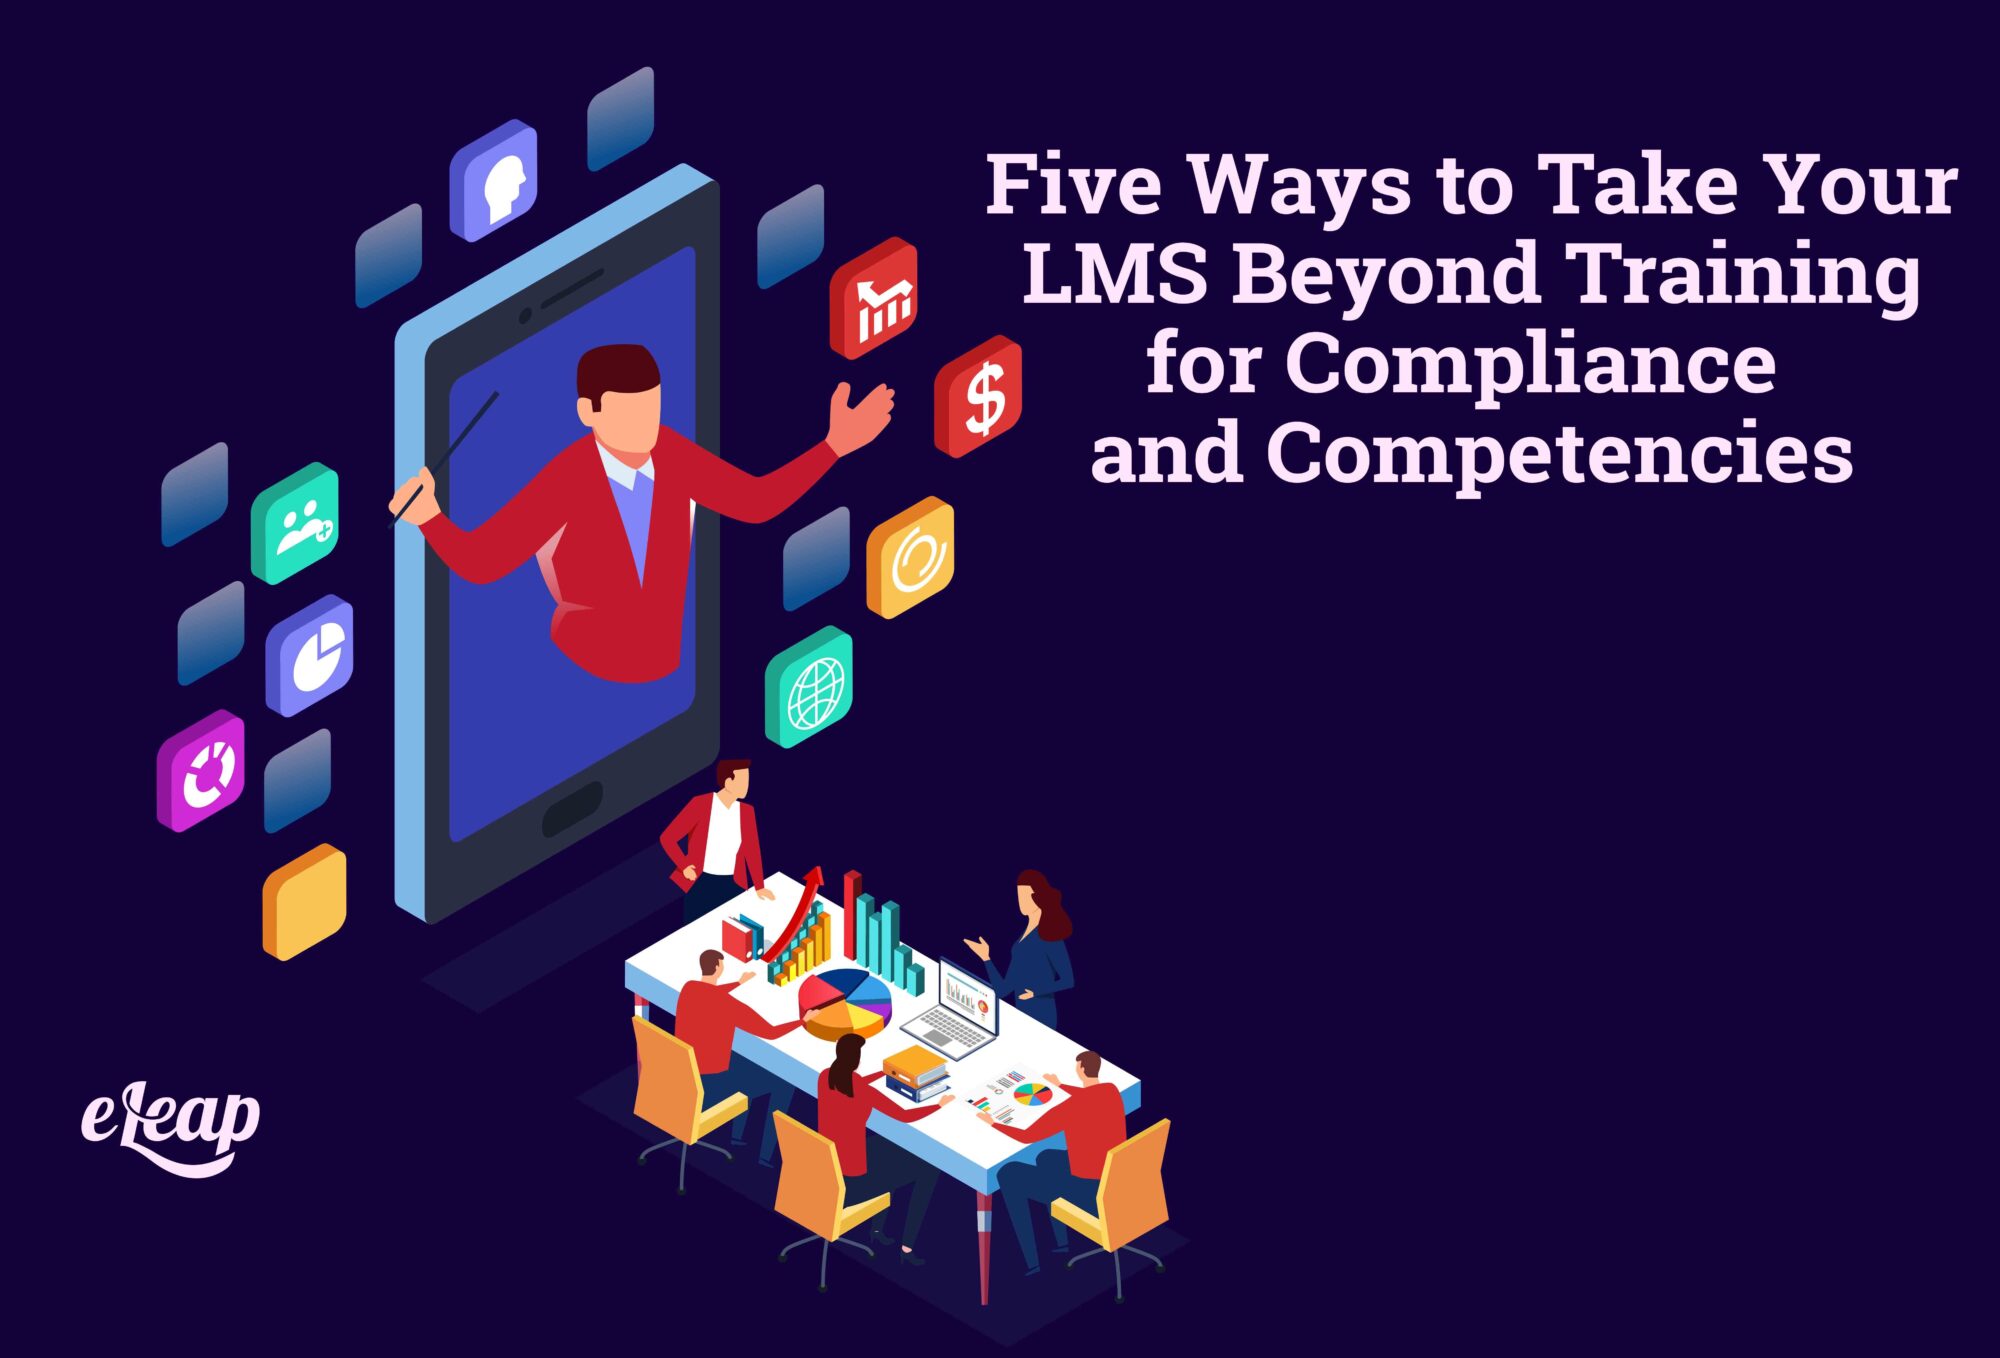 Five Ways to Take Your LMS Beyond Training for Compliance and Competencies